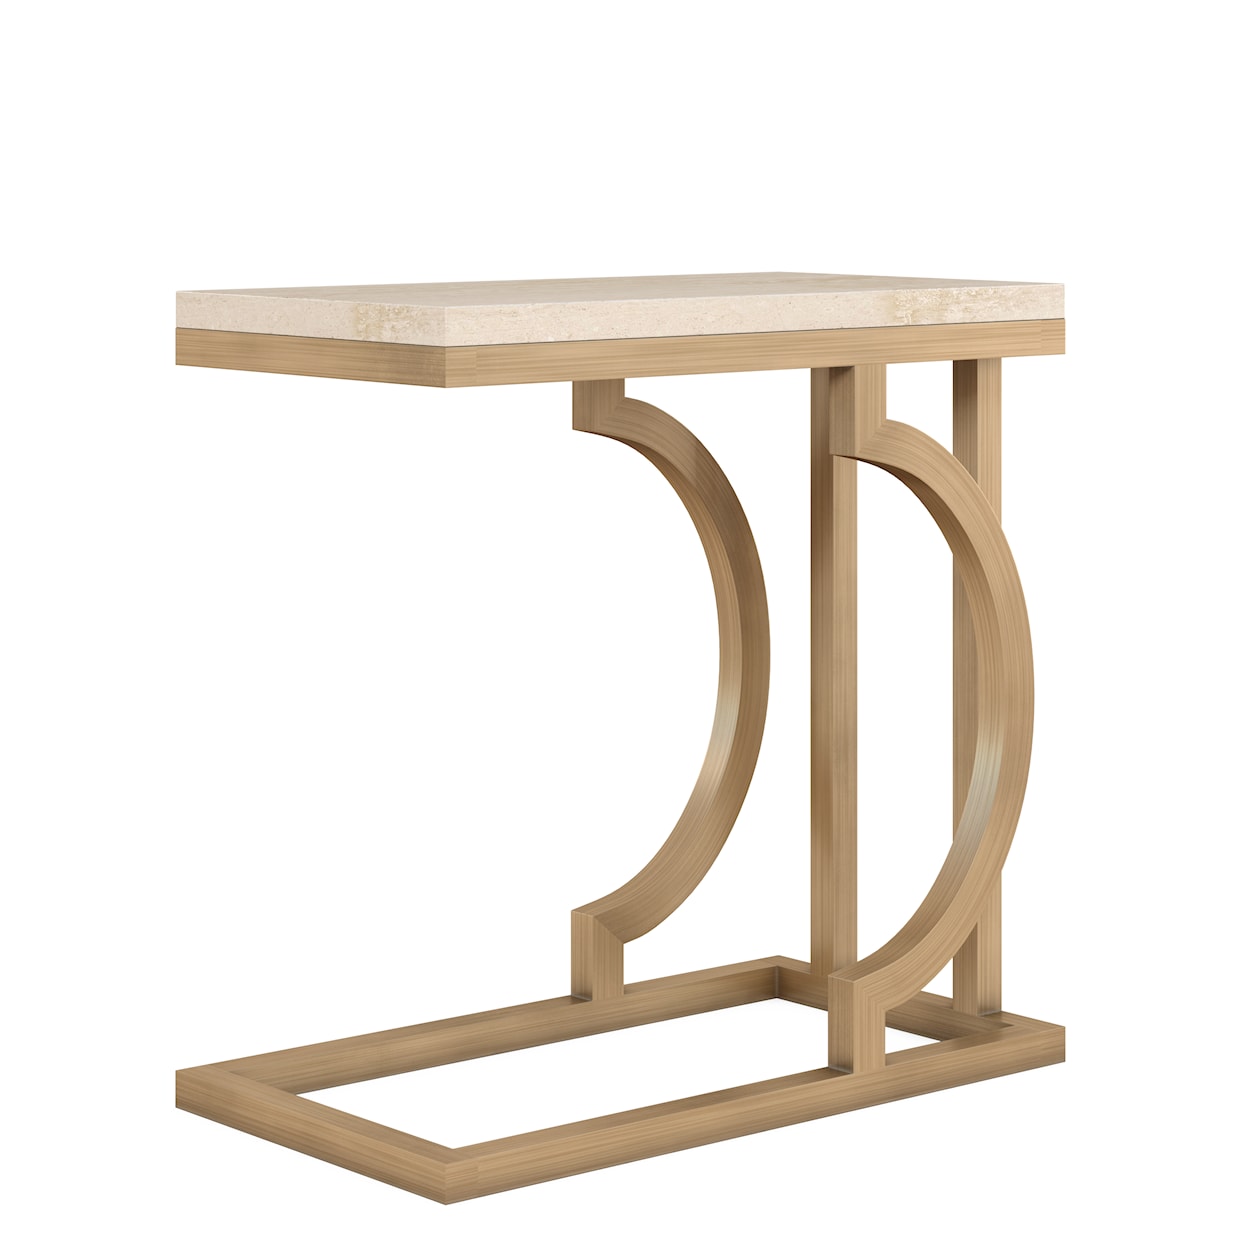 A.R.T. Furniture Inc Intersect Chairside Table